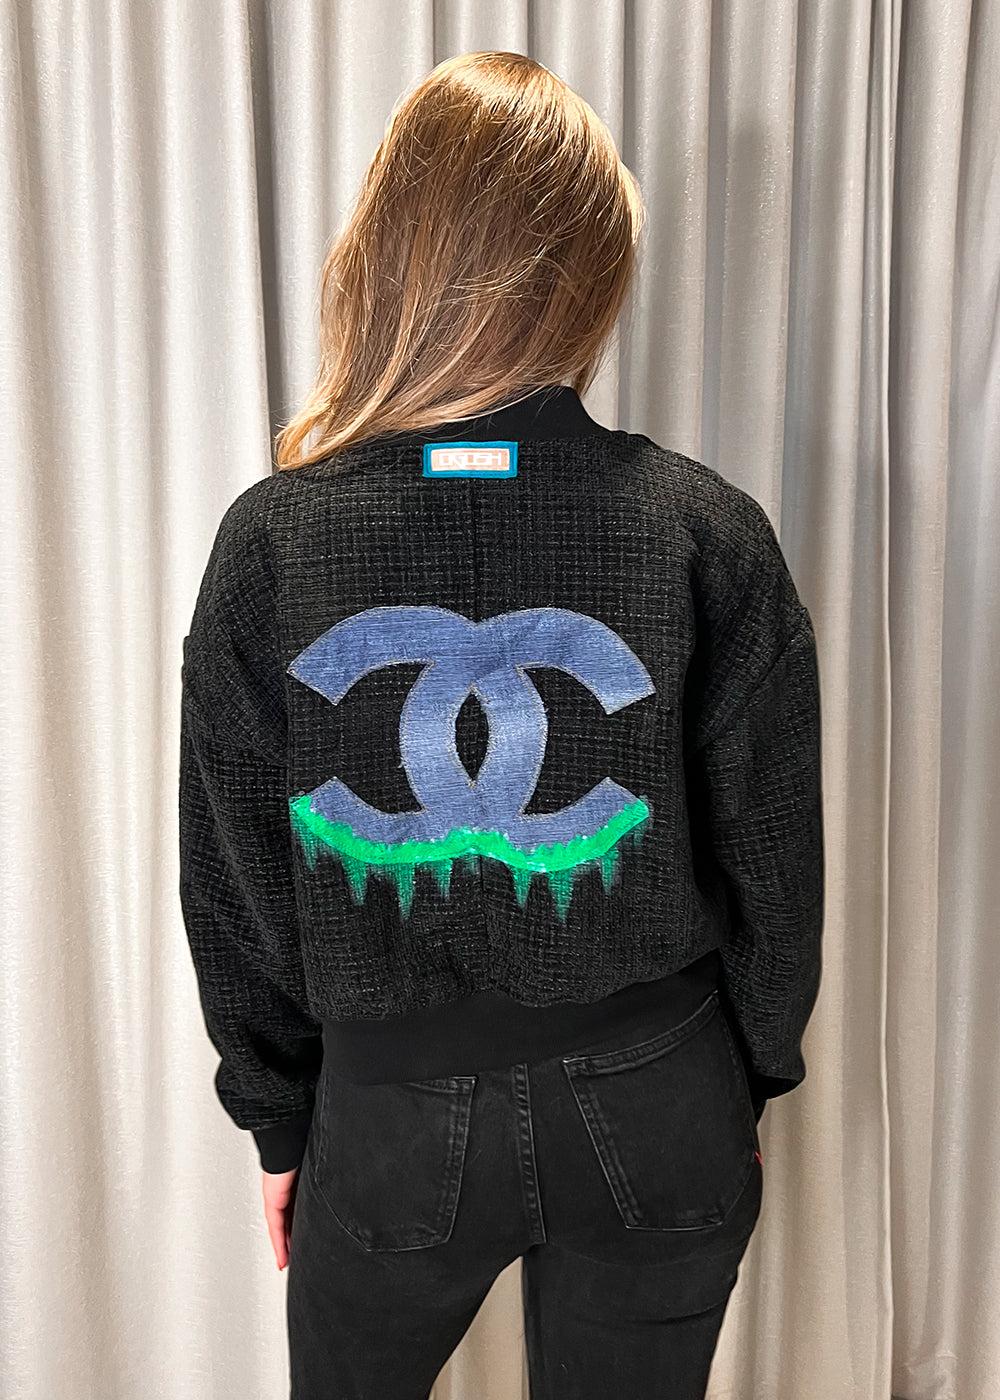 The Le-Chic Bomber - Black